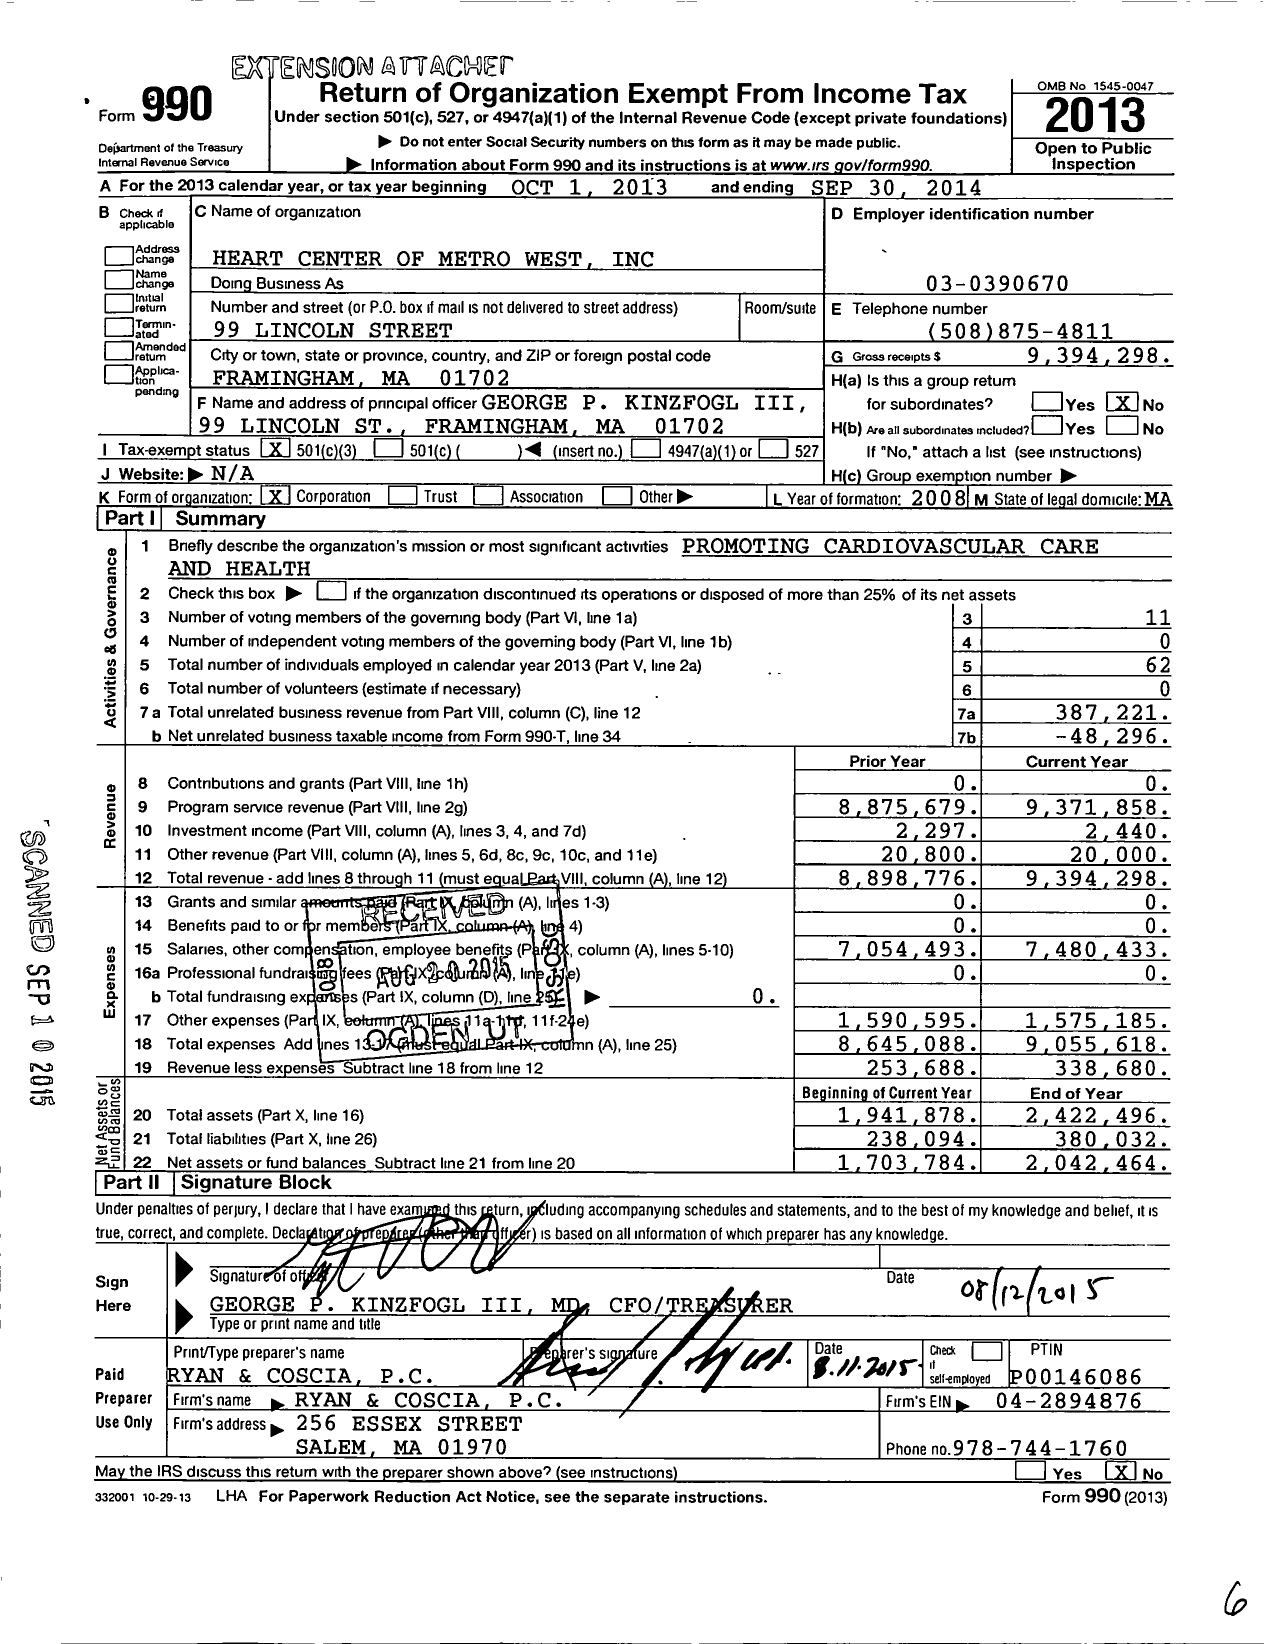 Image of first page of 2013 Form 990 for Heart Center of MetroWest (HCMW)